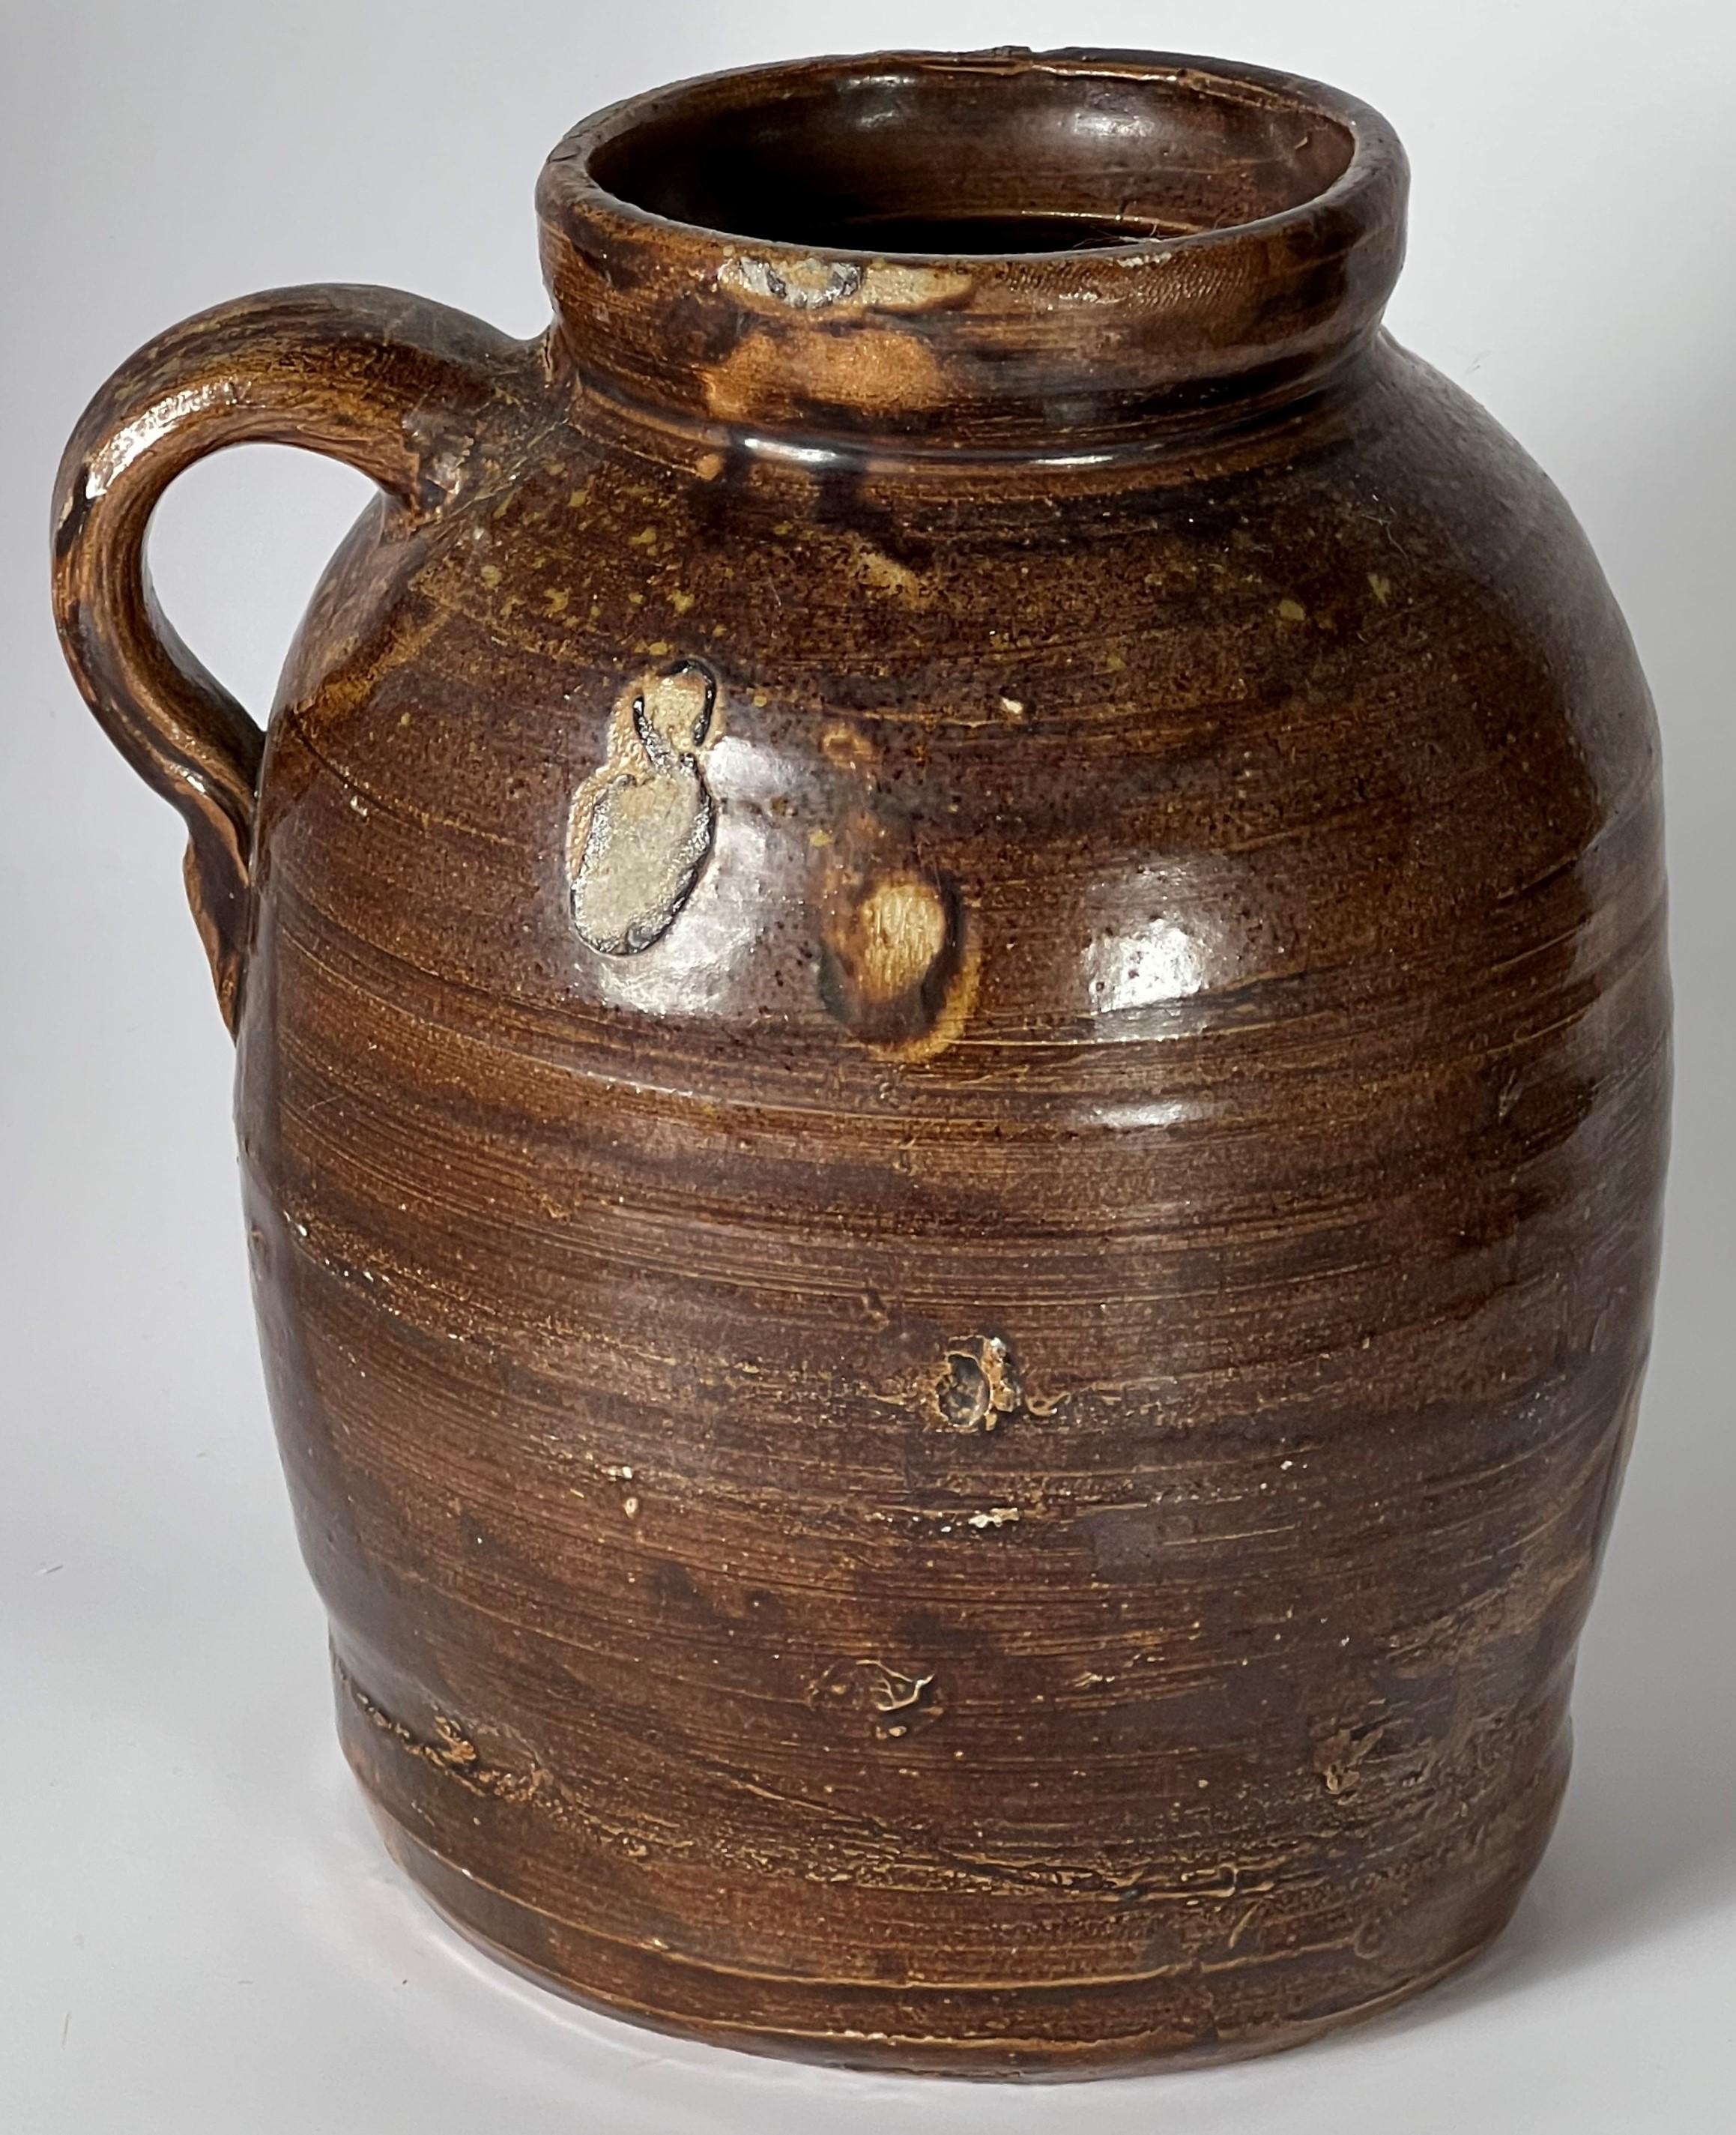 Sand Mountain Alabama pottery is well known, oft curated and infrequently available on the market. The variety of glazes, forms and makers is remarkable. Perhaps, the iconic form from Sand Mountain, the canning and/or preserve jars were a